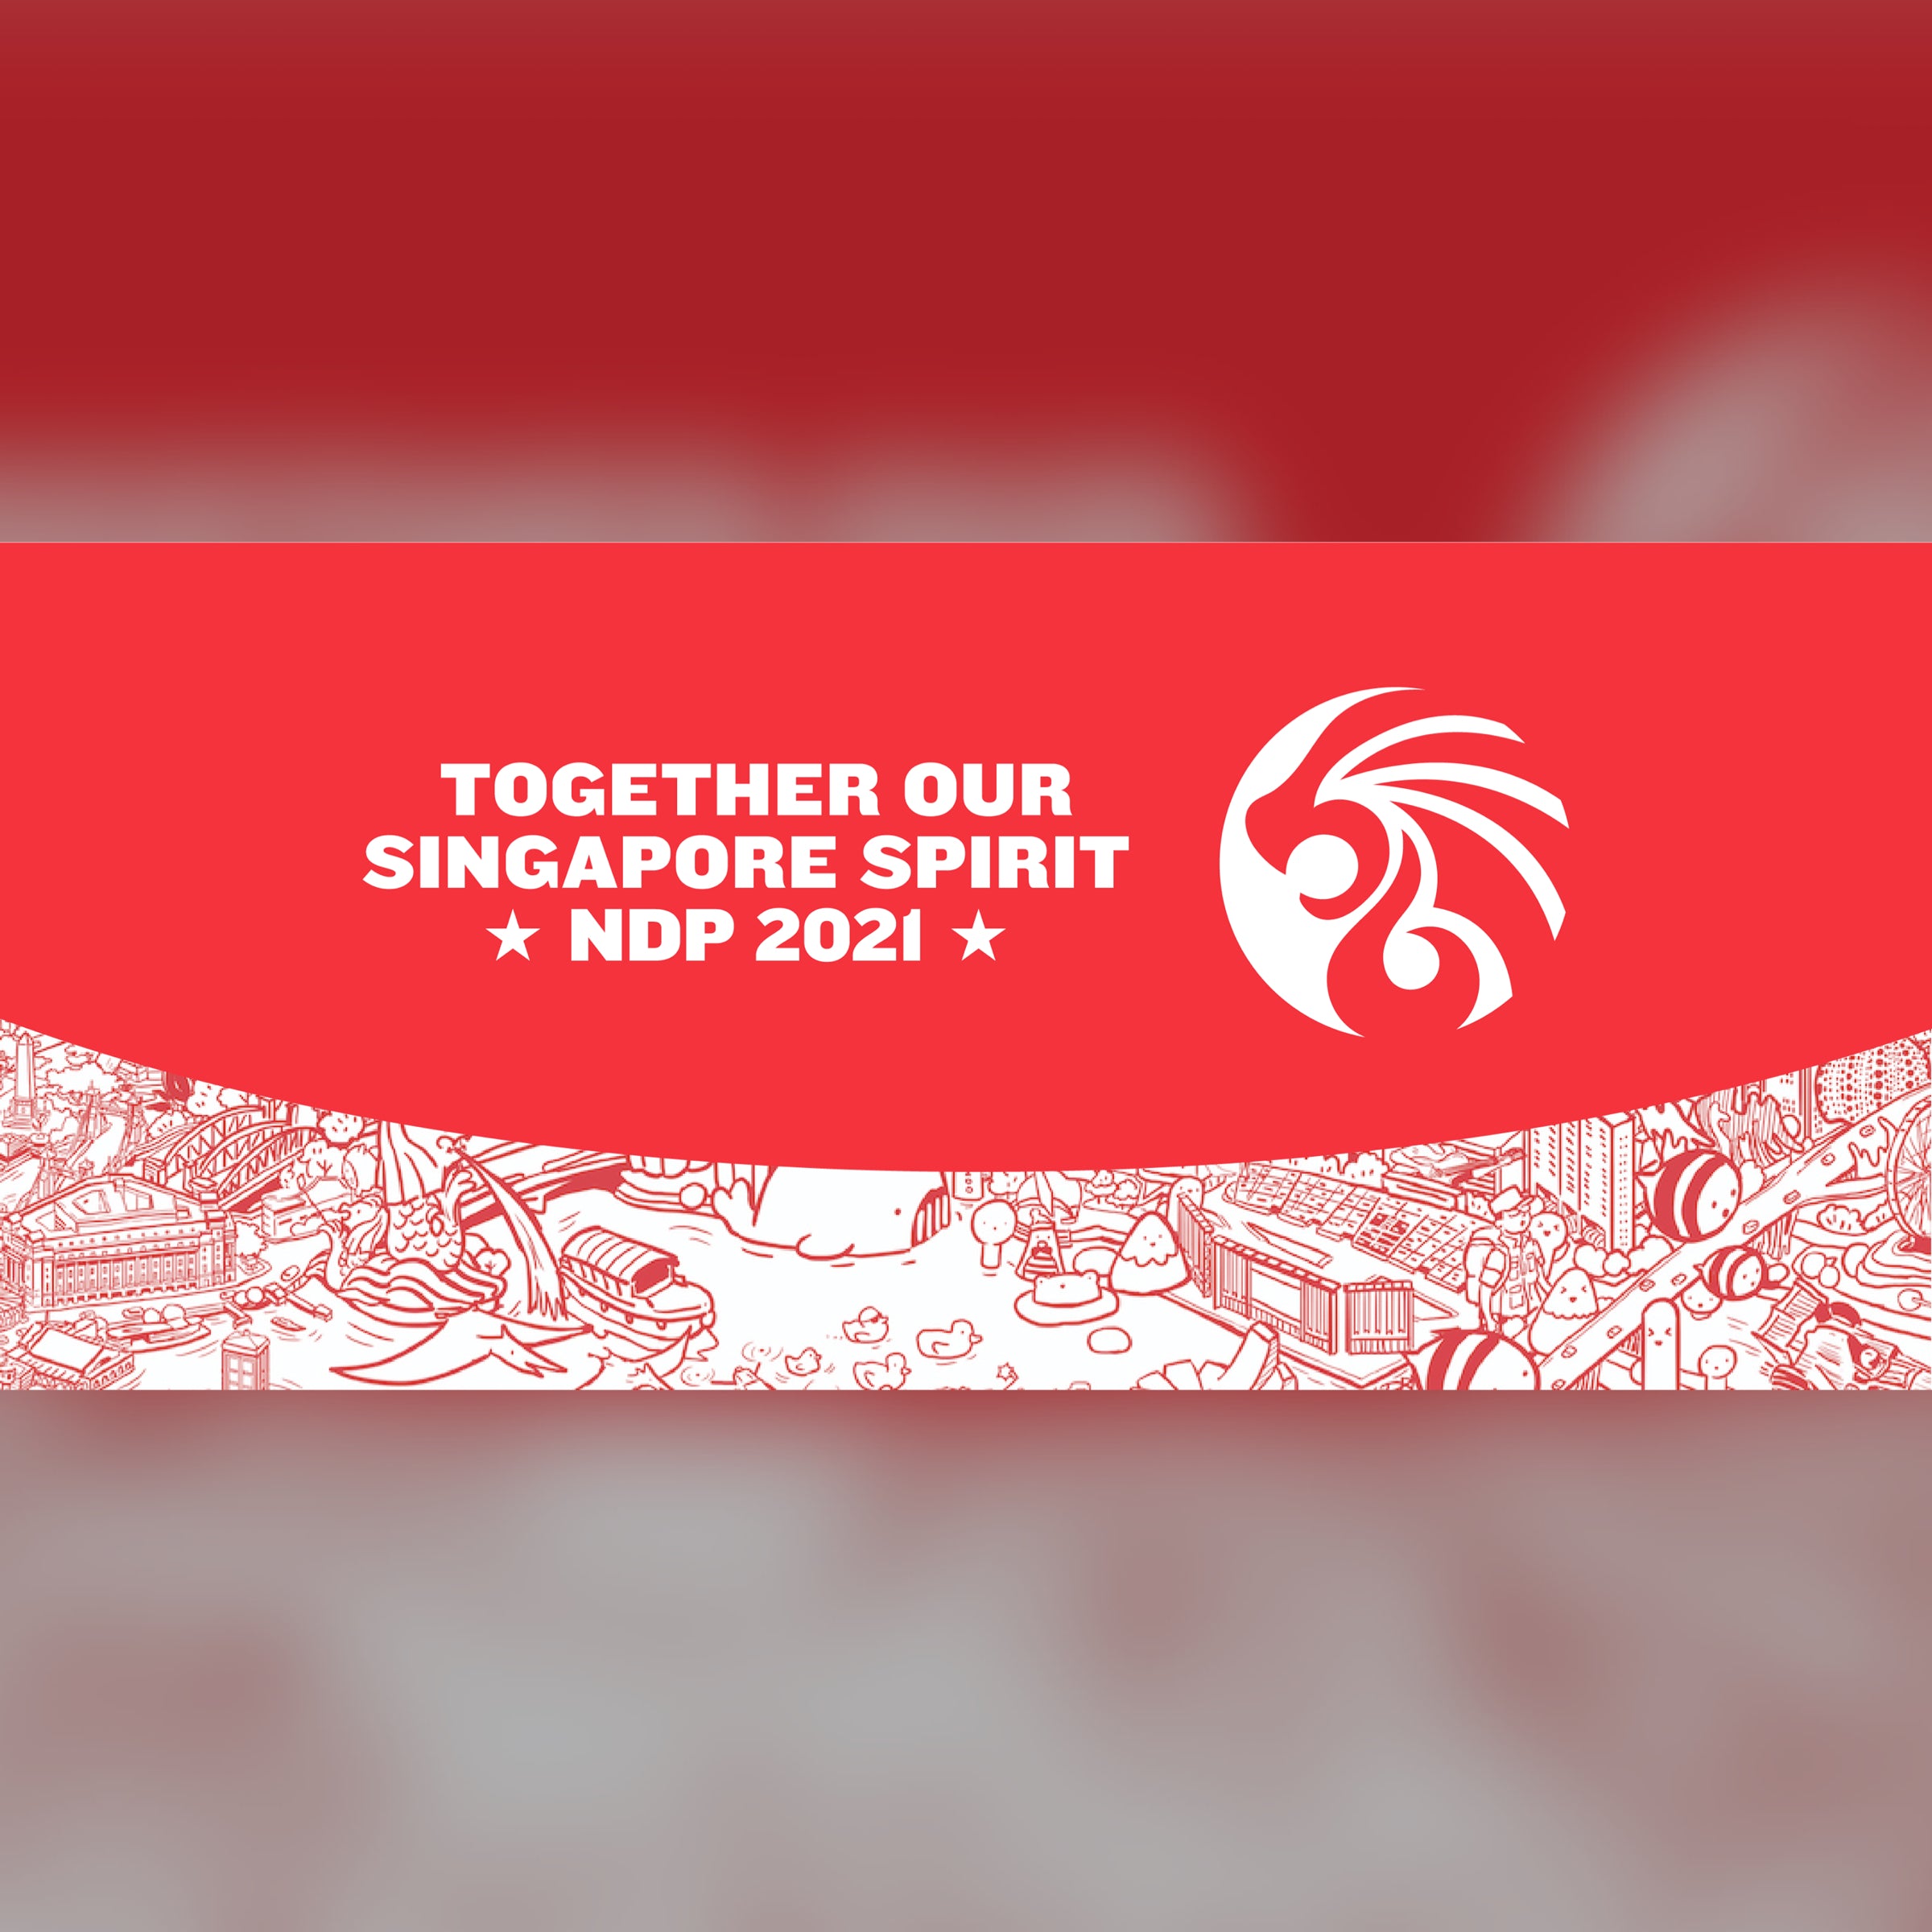 2021 national day logo. It has a cute Singapore landscape drawn along with this year's theme stated.